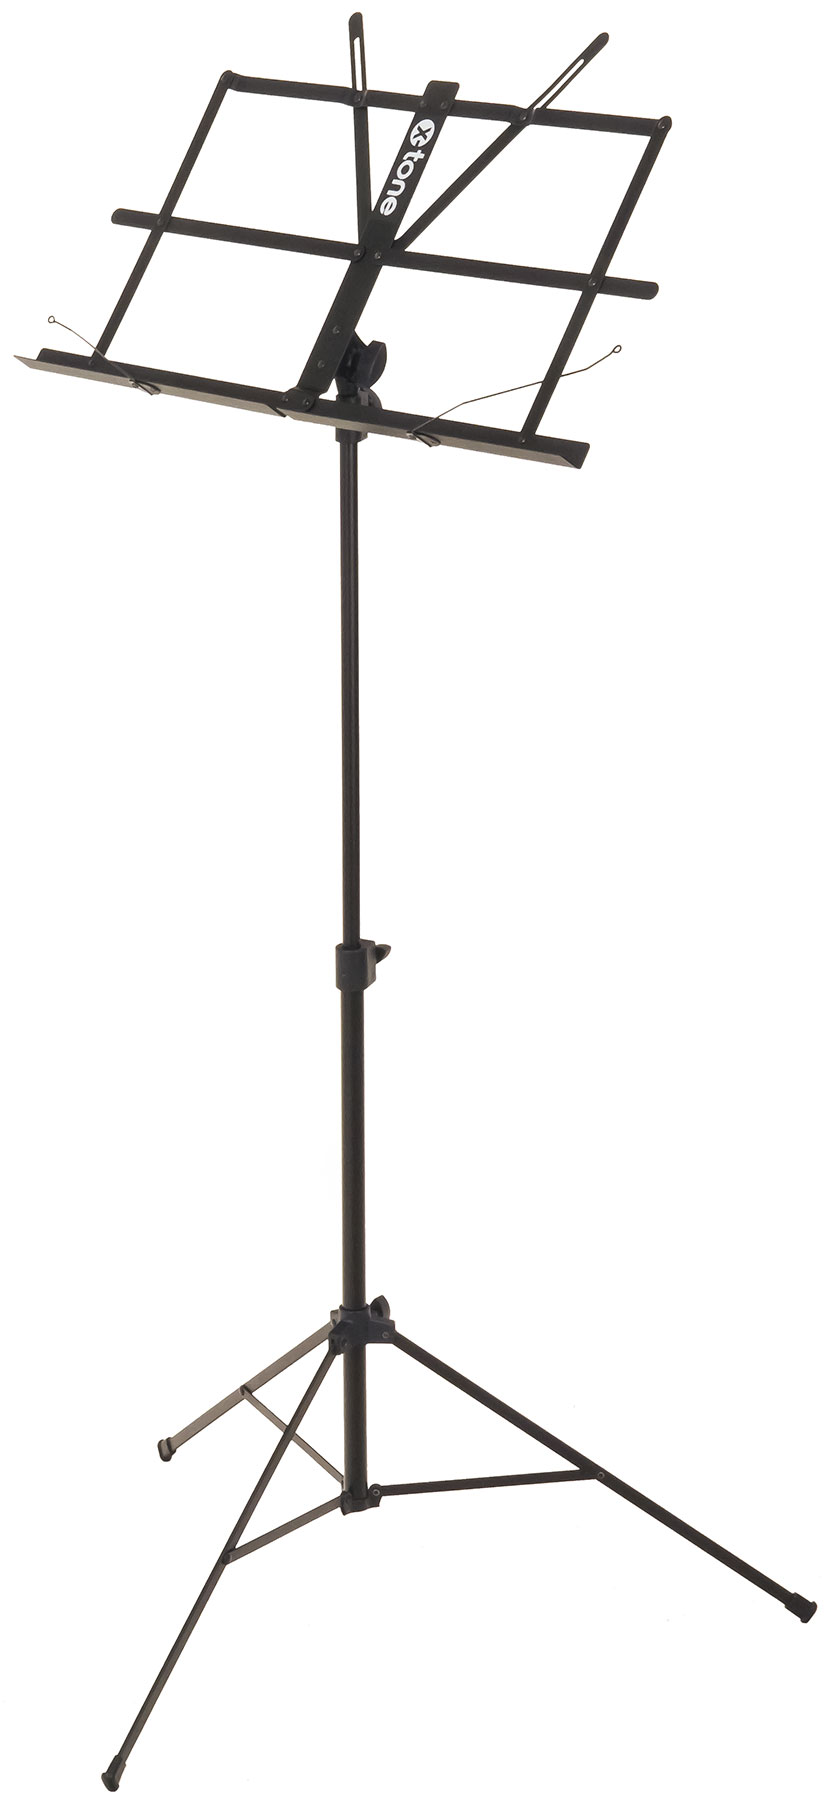 X-tone Xh 6500 Pupitre Pliable - Music stand - Variation 1